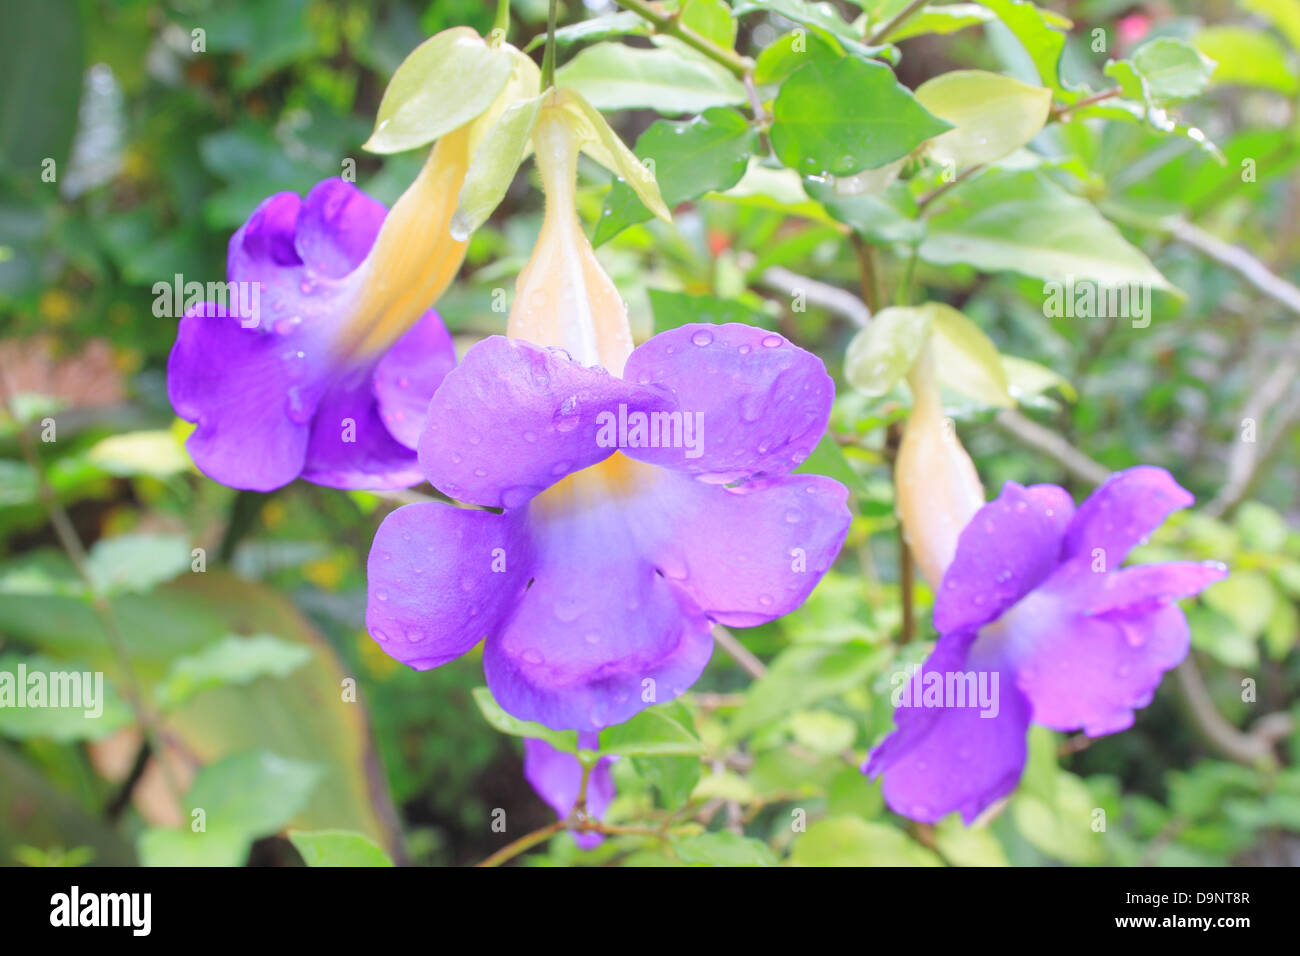 close up thunbergia against leaves Stock Photo